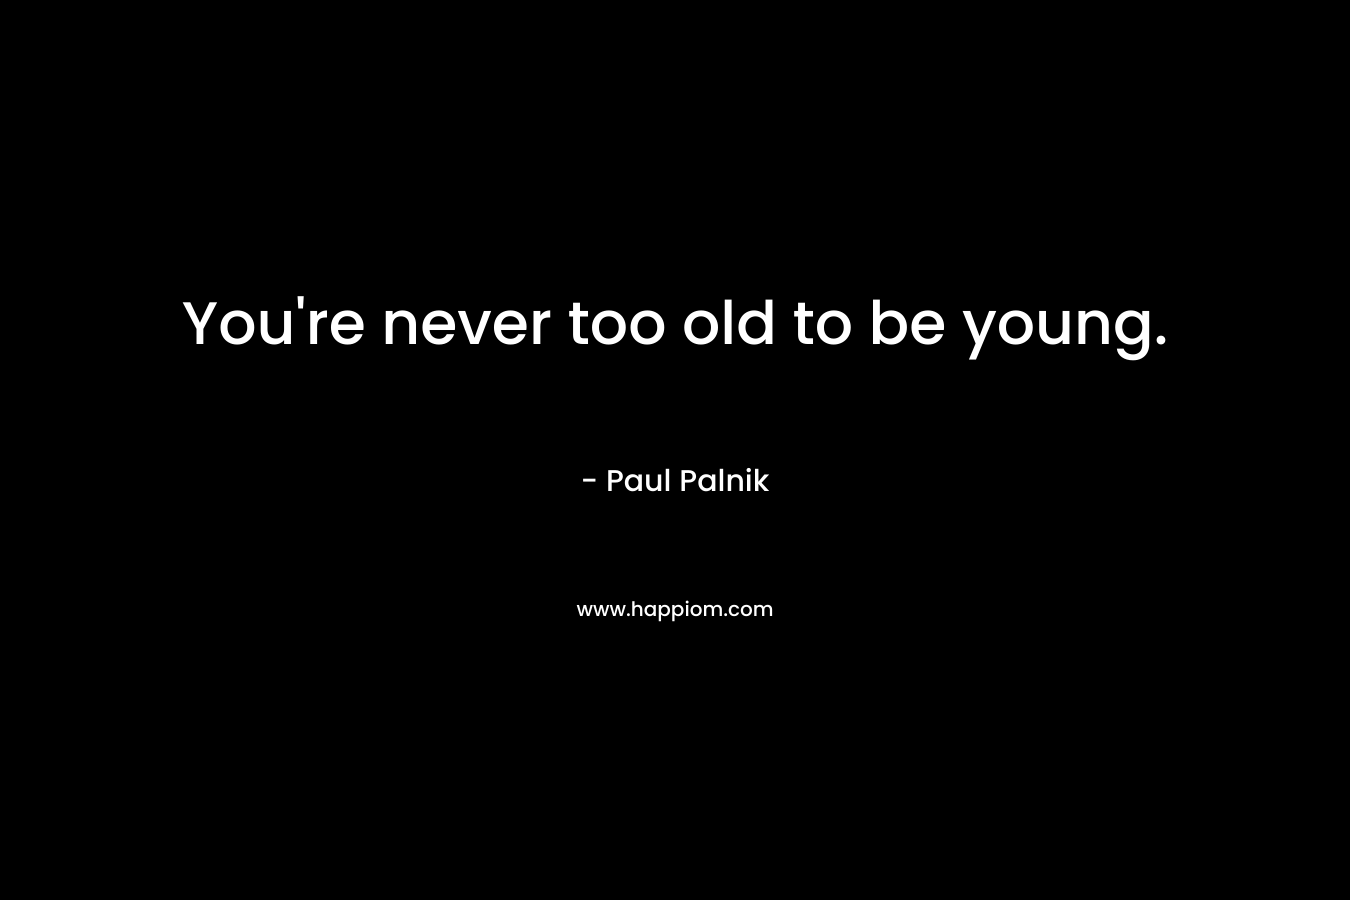 You're never too old to be young.